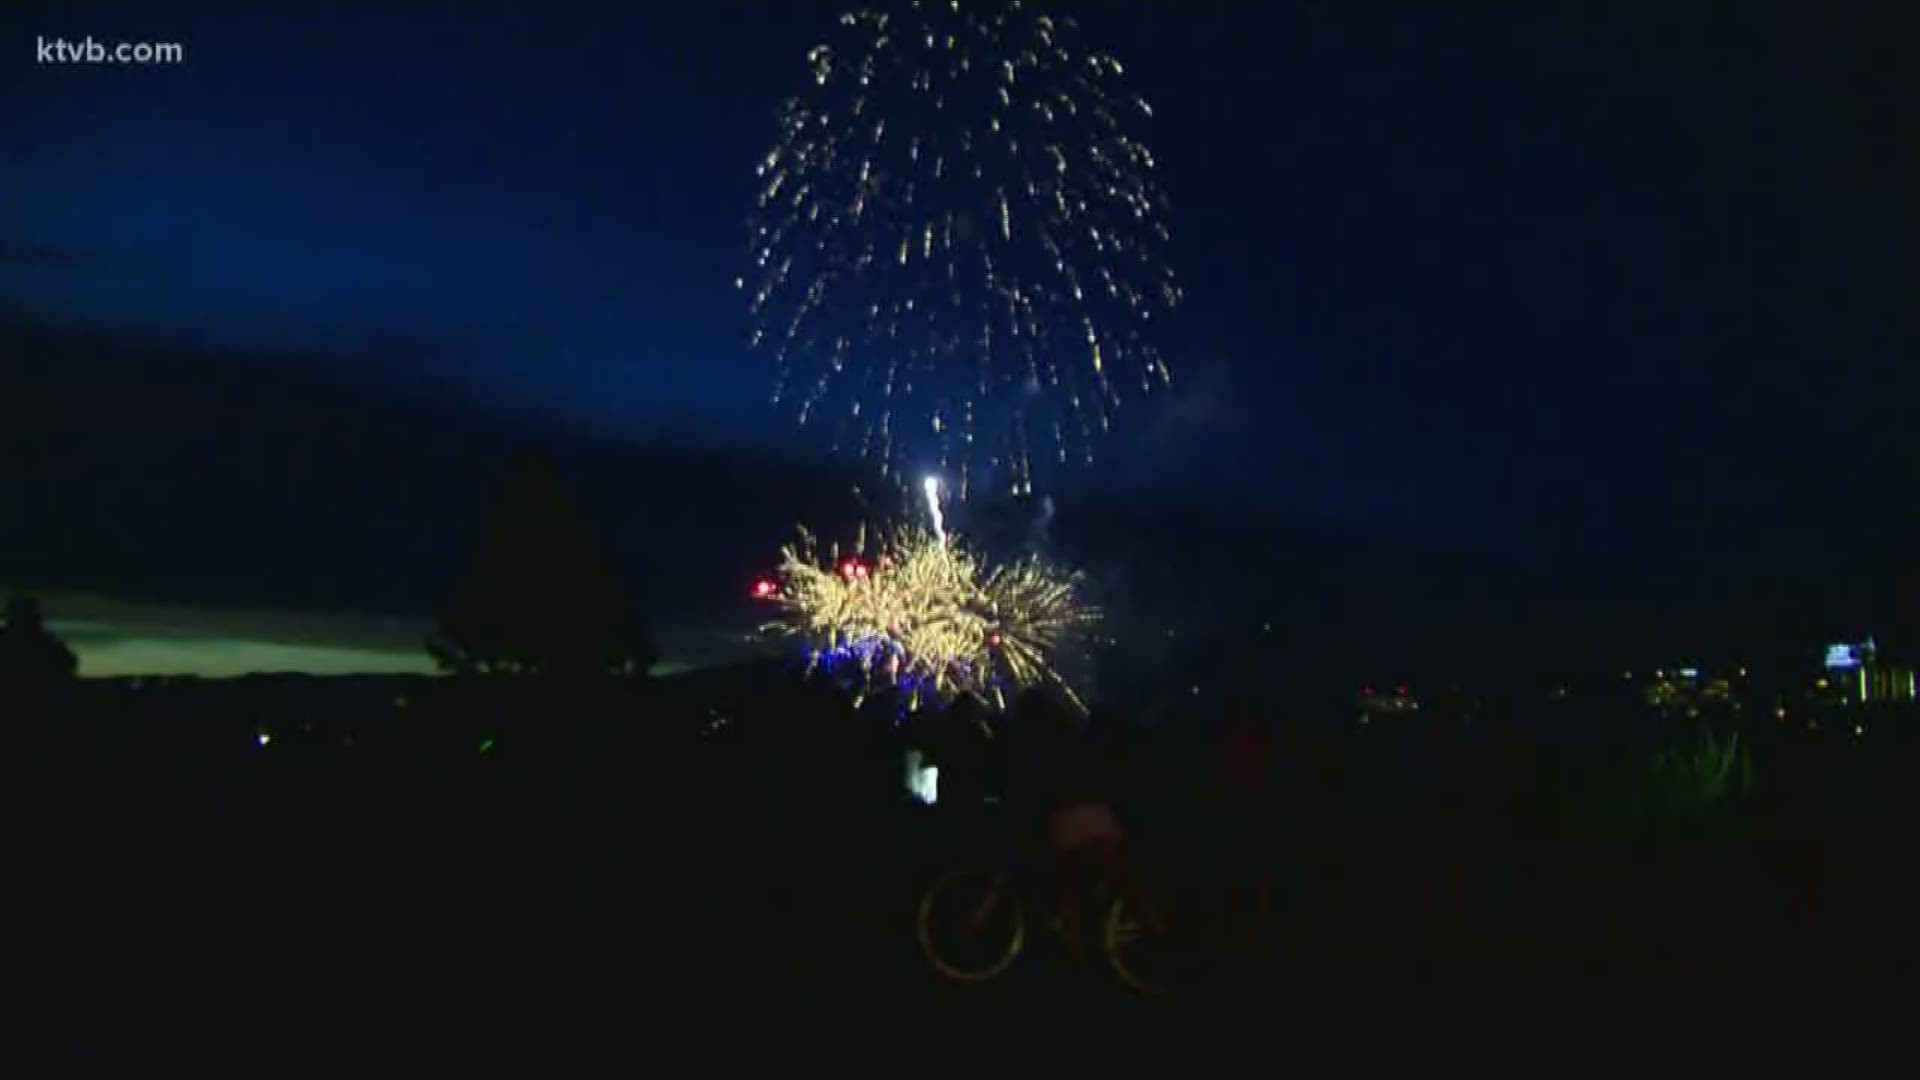 “In recent years Nampa has seen an increase in communication from concerned citizens regarding the use of illegal aerial fireworks within our city.”